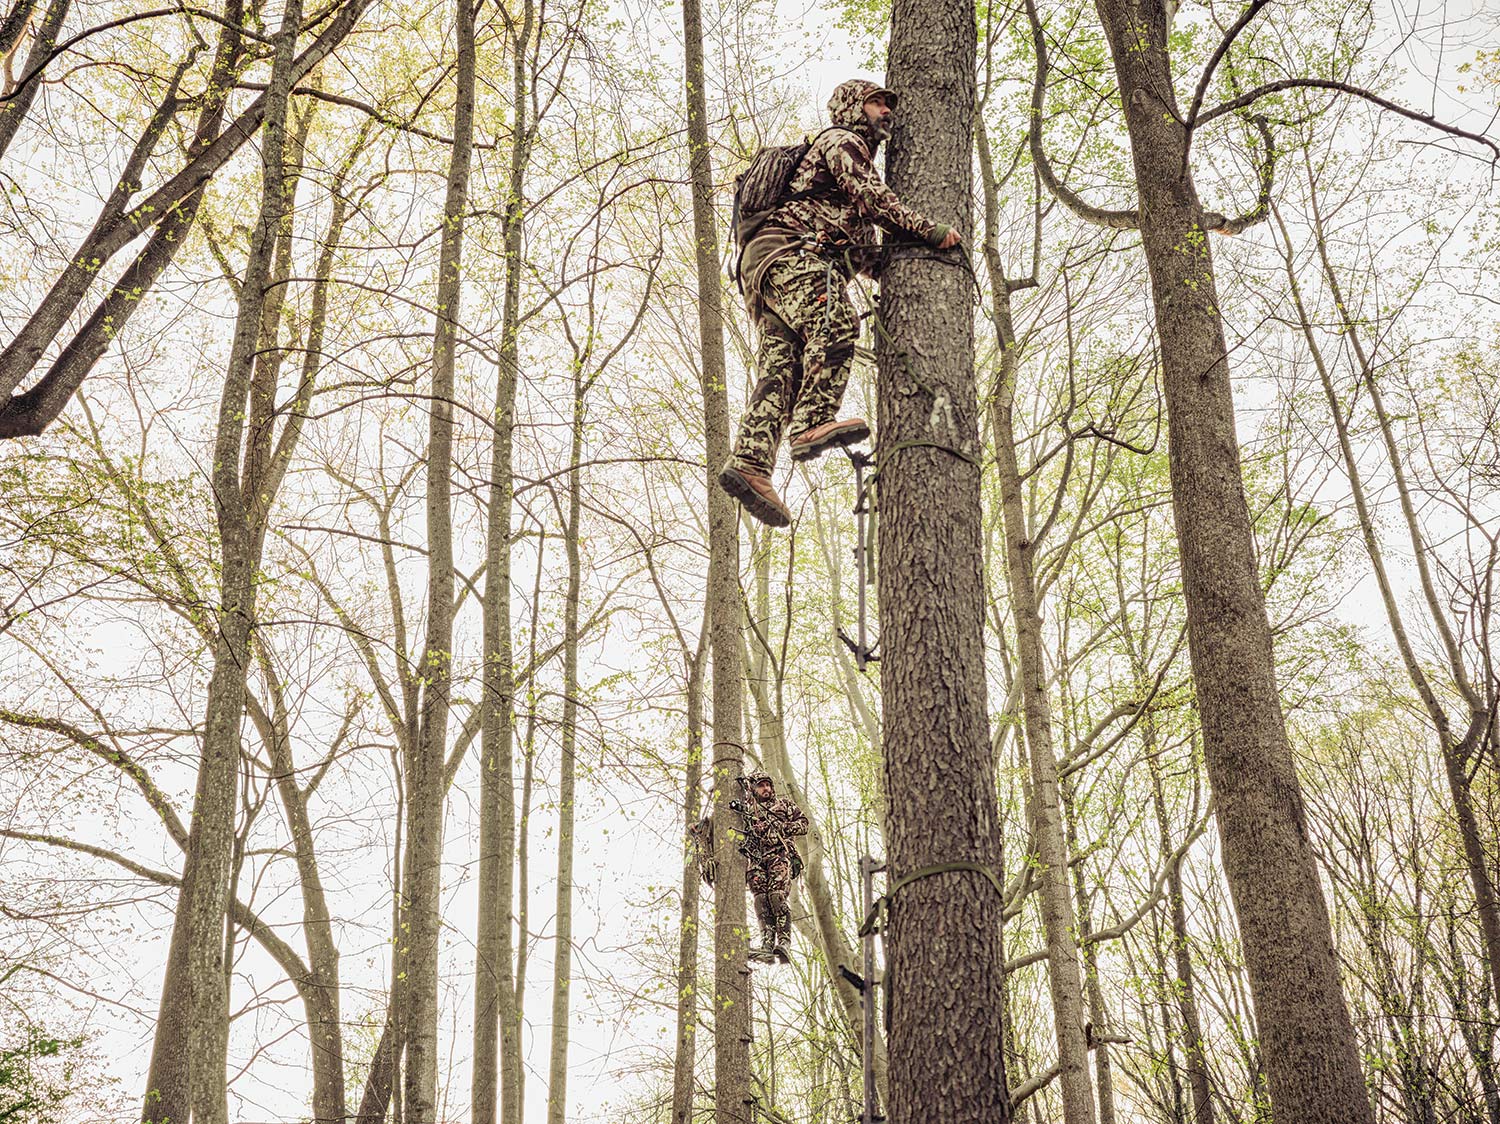 Two hunters use tree climbers to climb trees in the woods.